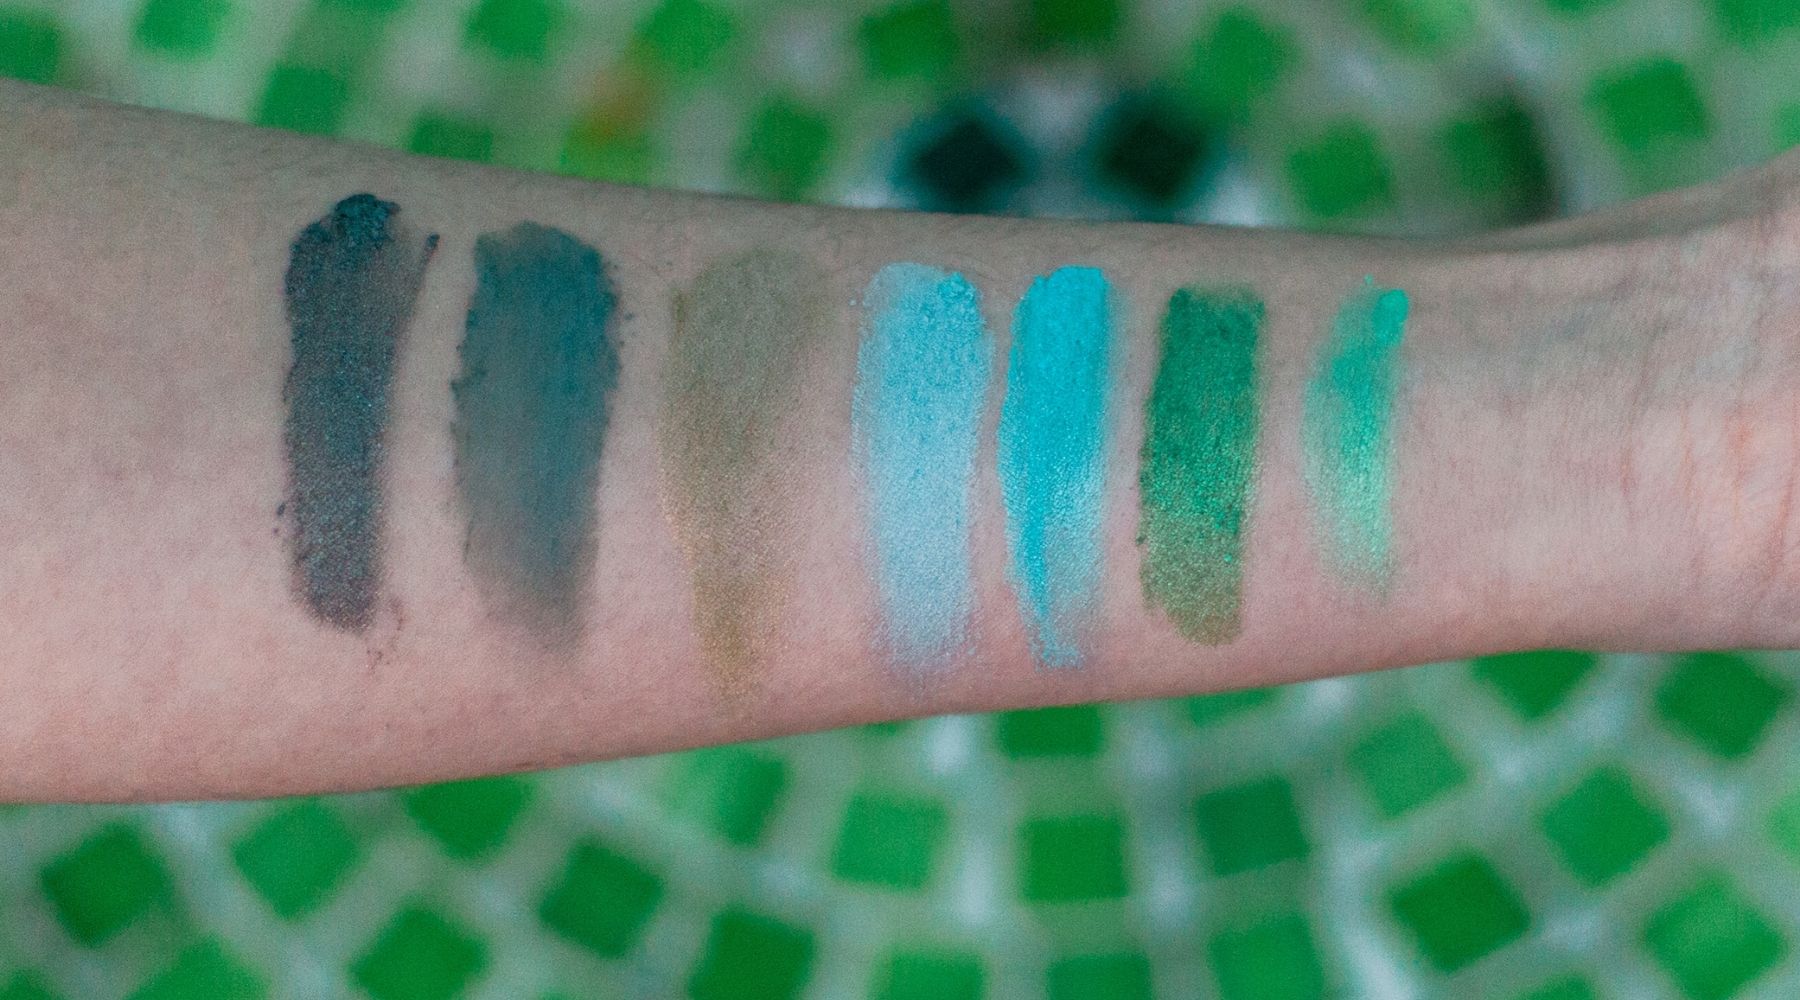 green eyeshadow swatches on arm